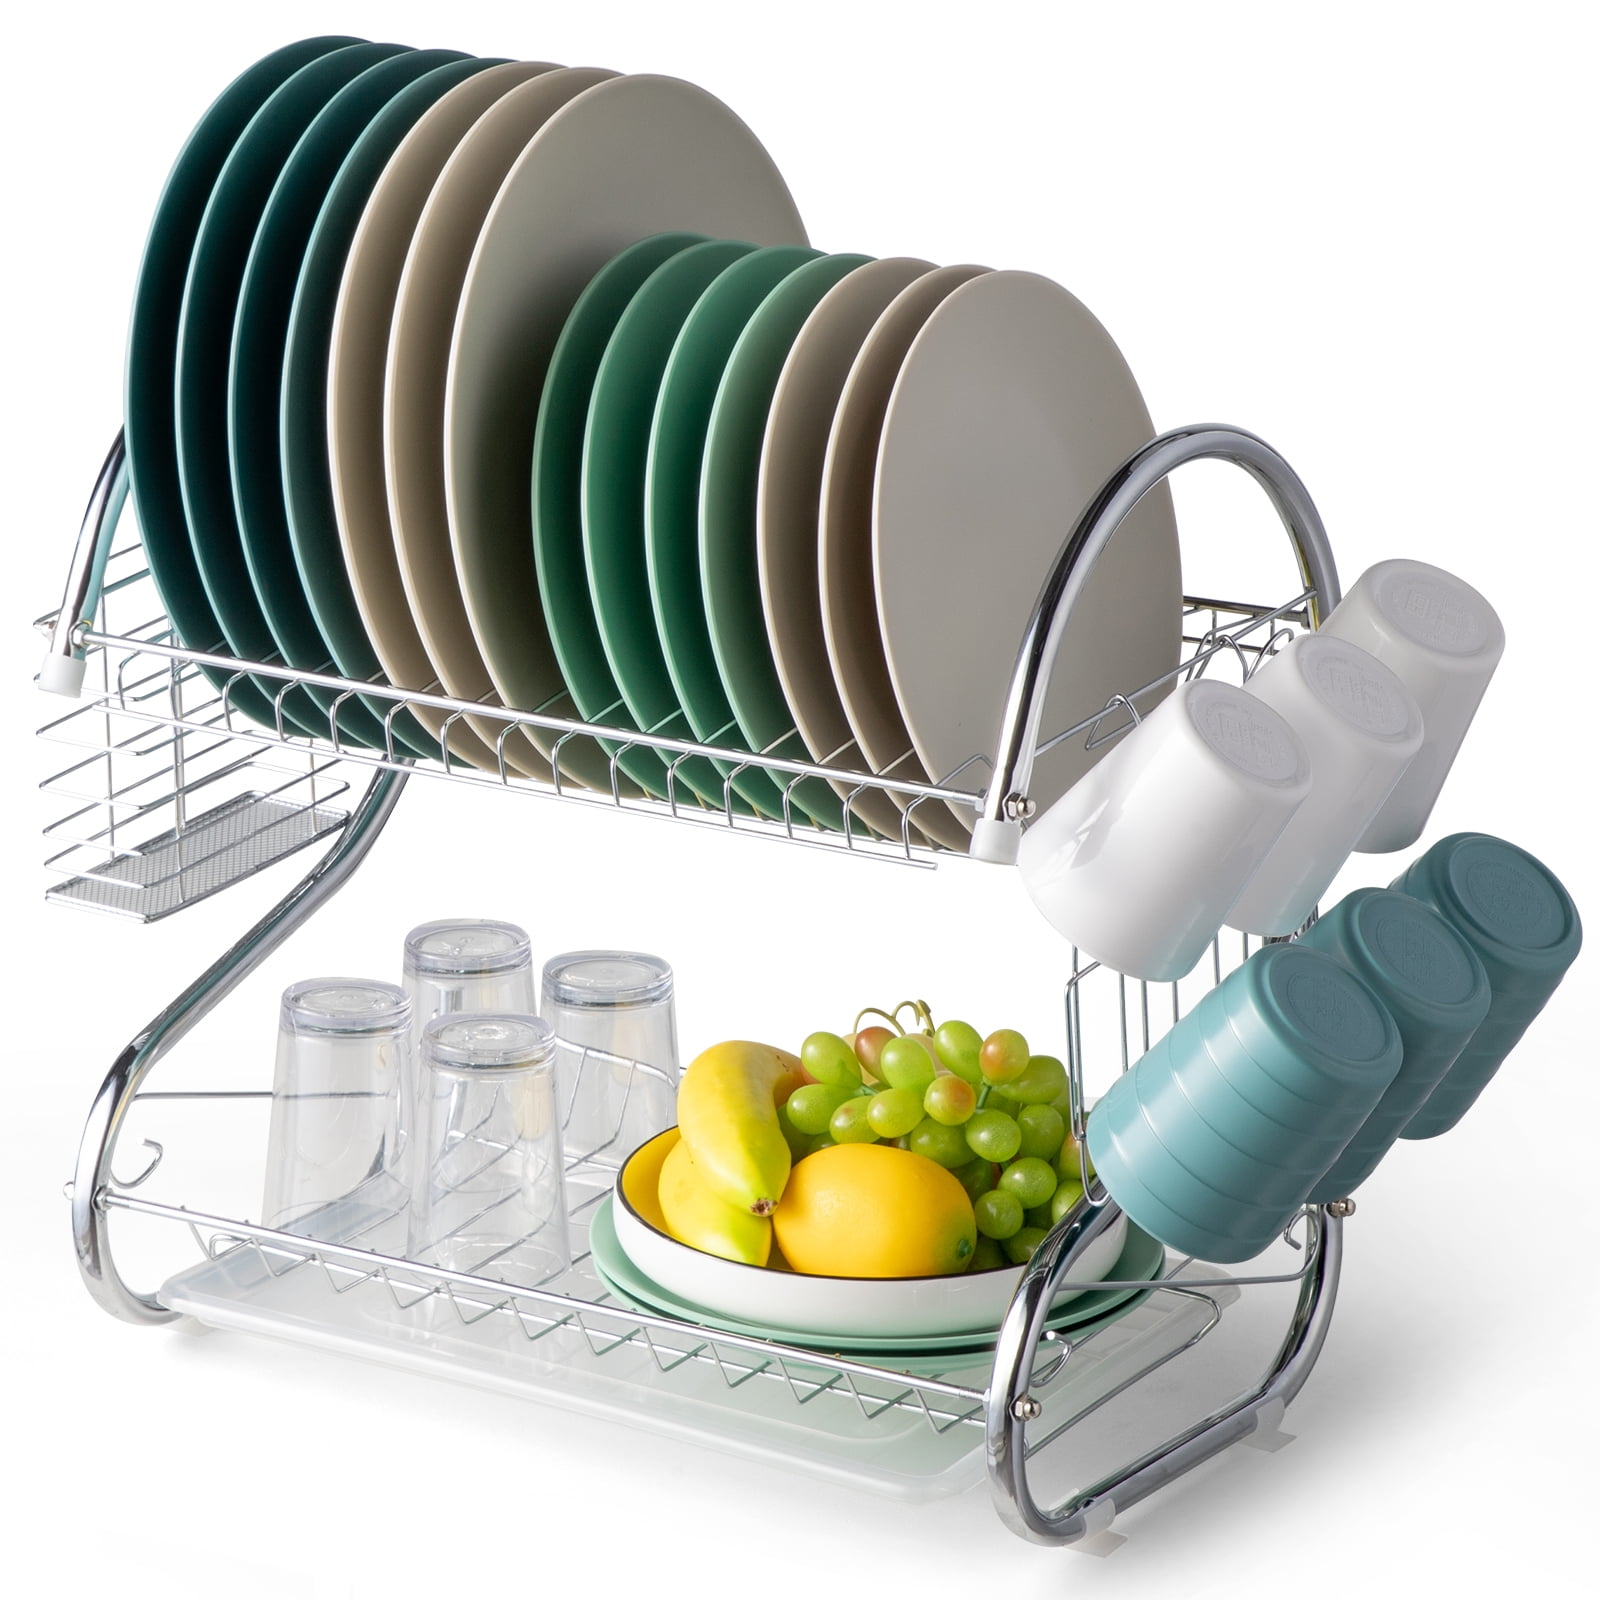 Mighty Rock Bowl Rack Dish Rack 2 Tier Dish Rack with Cup Holder